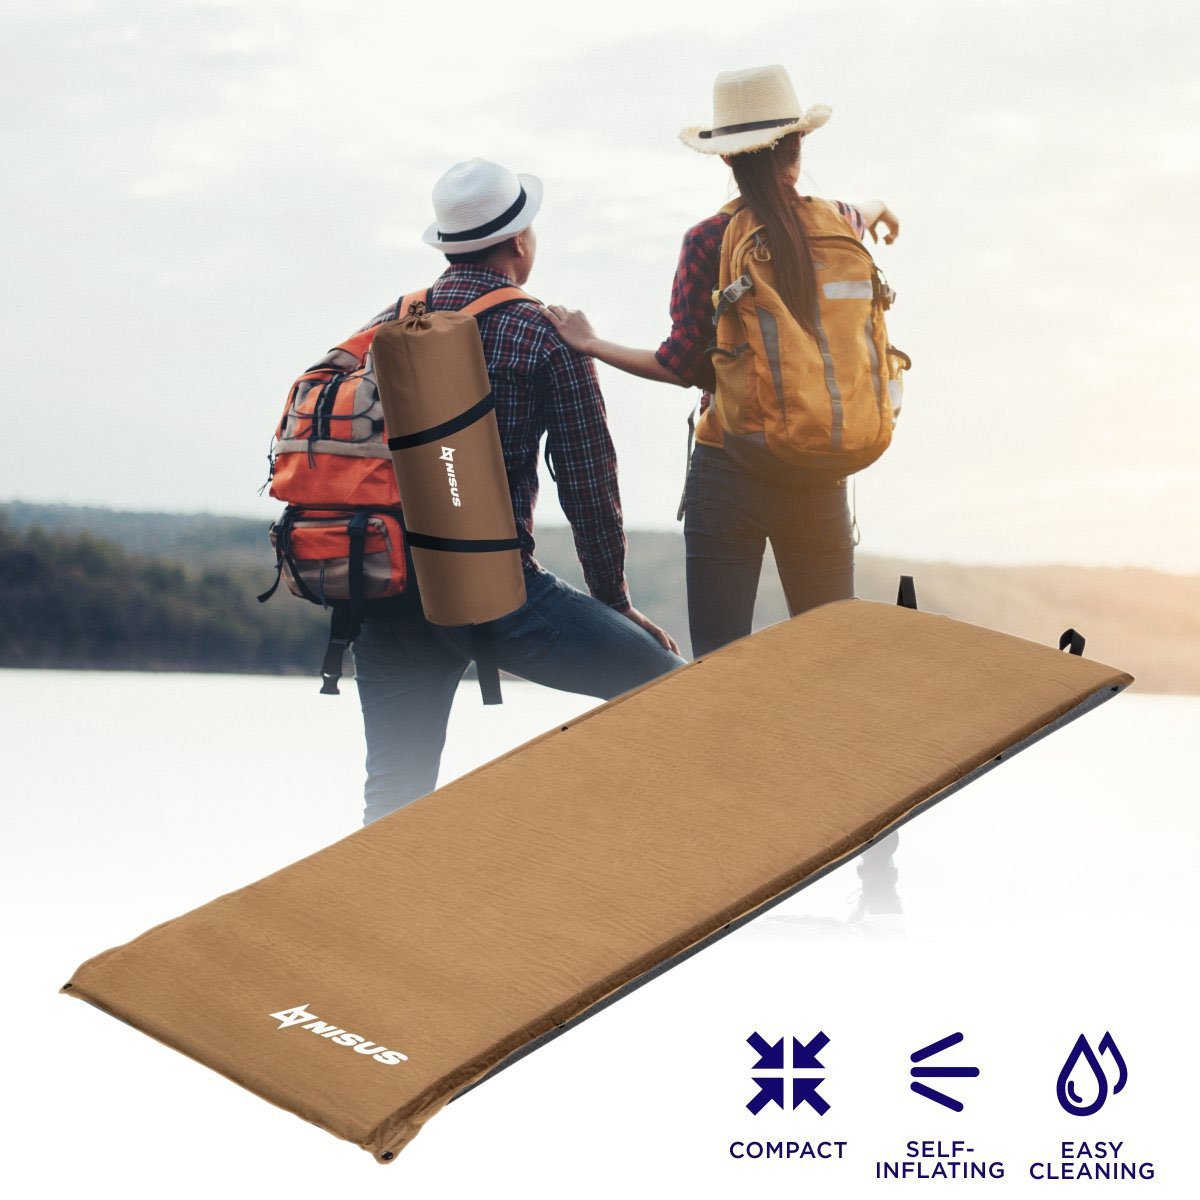 Beige Self Inflating Sleeping Pad is lightweight and compact, perfect for outdoor trips